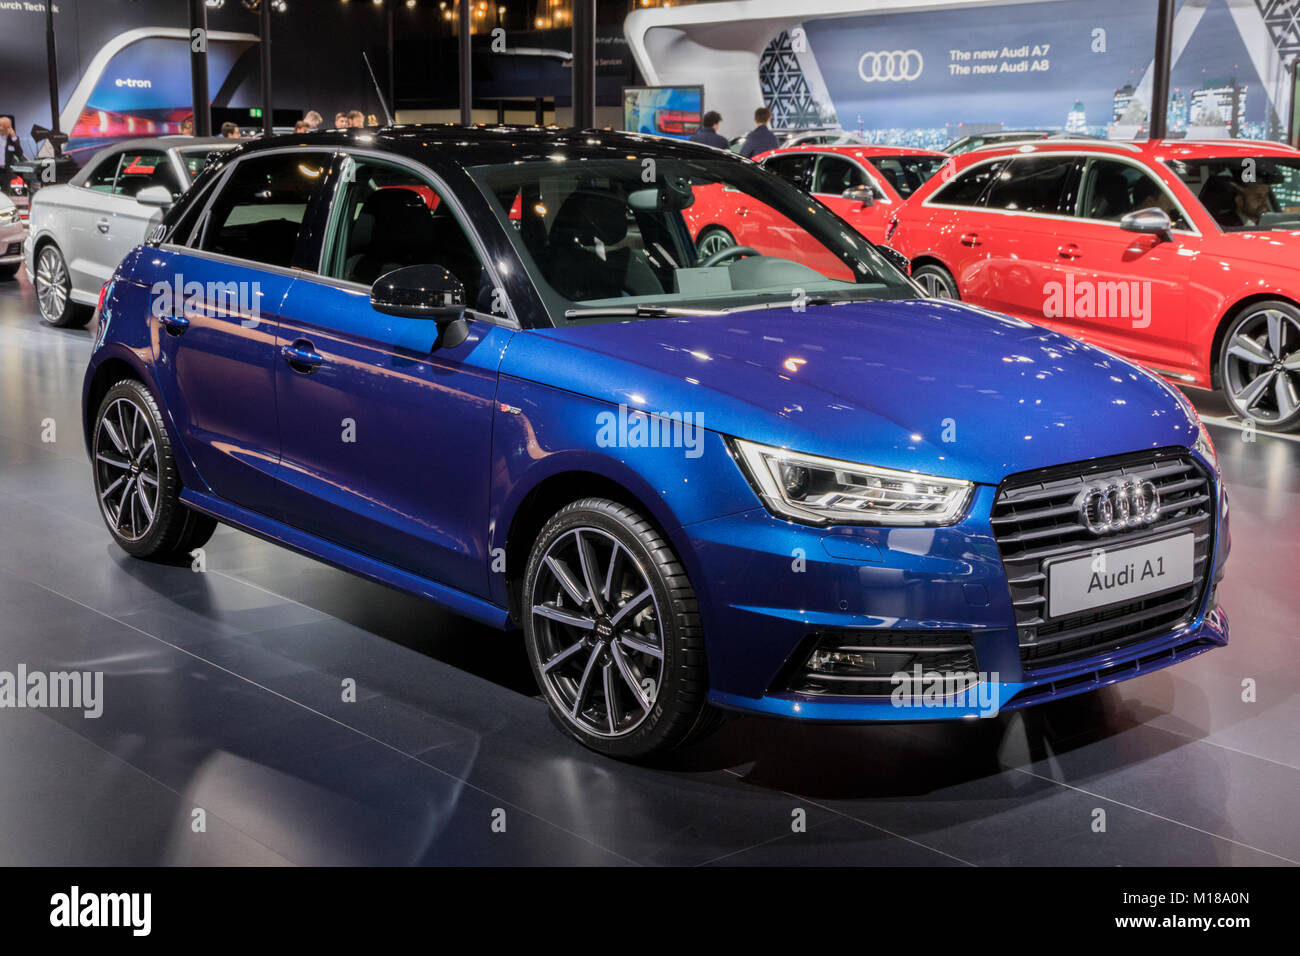 BRUSSELS - JAN 10, 2018: Audi A1 economy car showcased at the Brussels Motor Show. Stock Photo